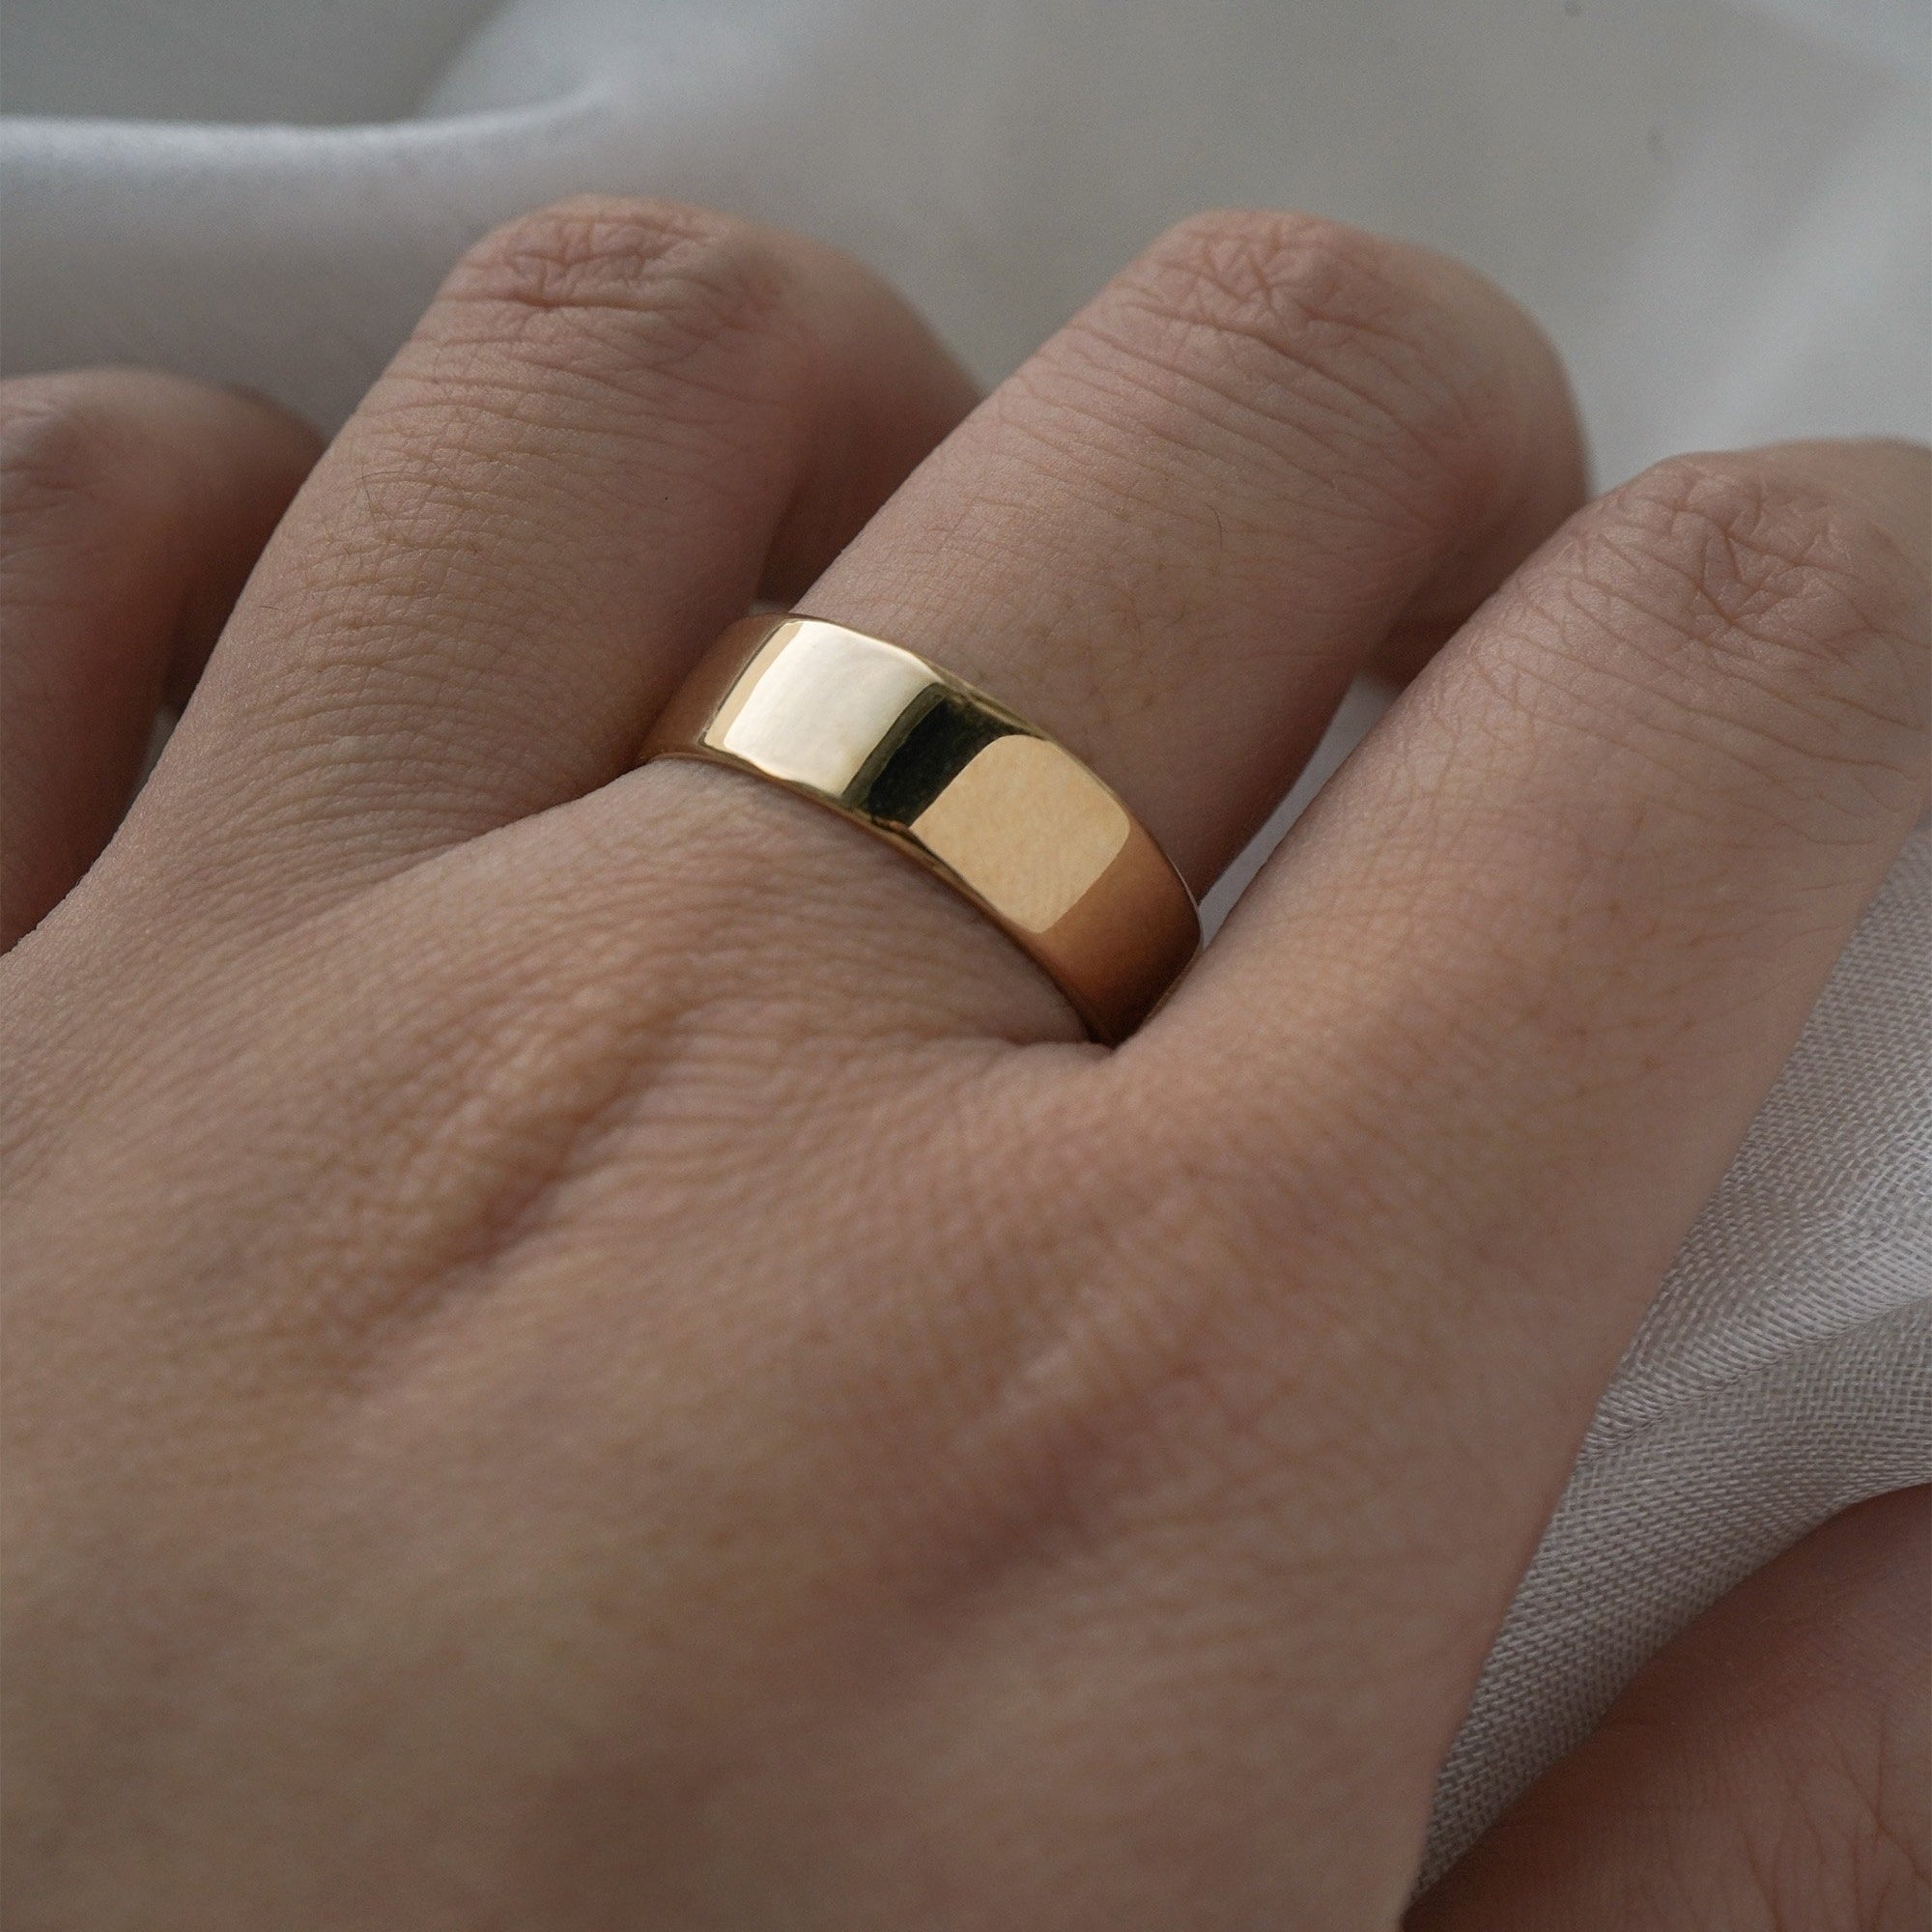 A stock photo of Laurie Fleming Jewellery's plain solid gold "Rowan" band, a 6mm wide flat comfort fit stacking ring/wedding band, handmade in Toronto. The ring is worn on a hand with a light grey background.